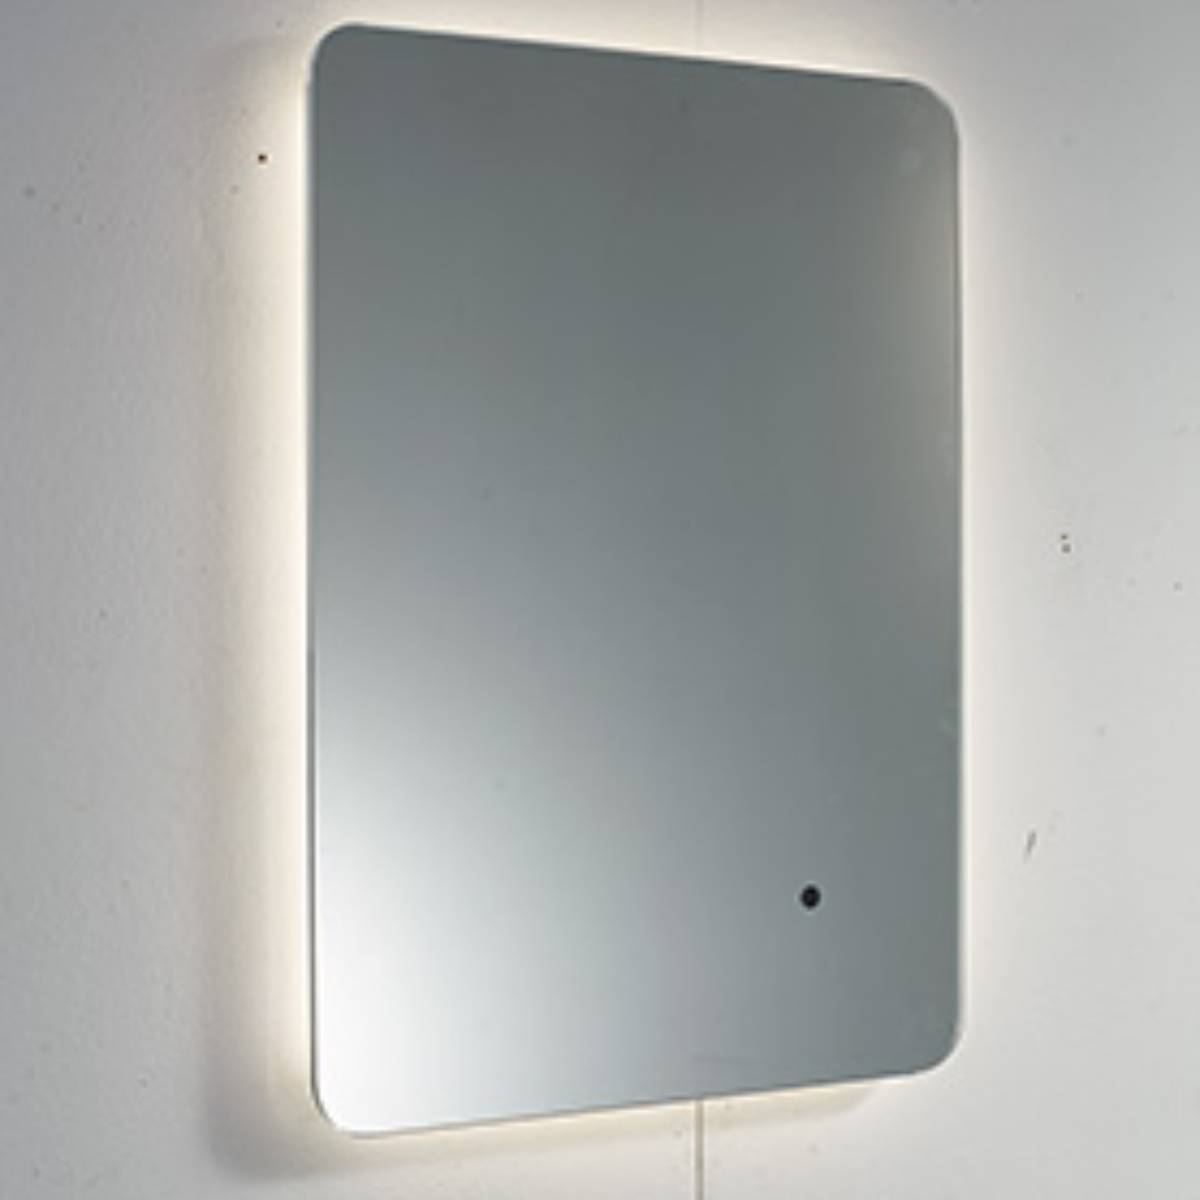 Clear Look Calcot 700 x 500mm LED Mirror (12085)